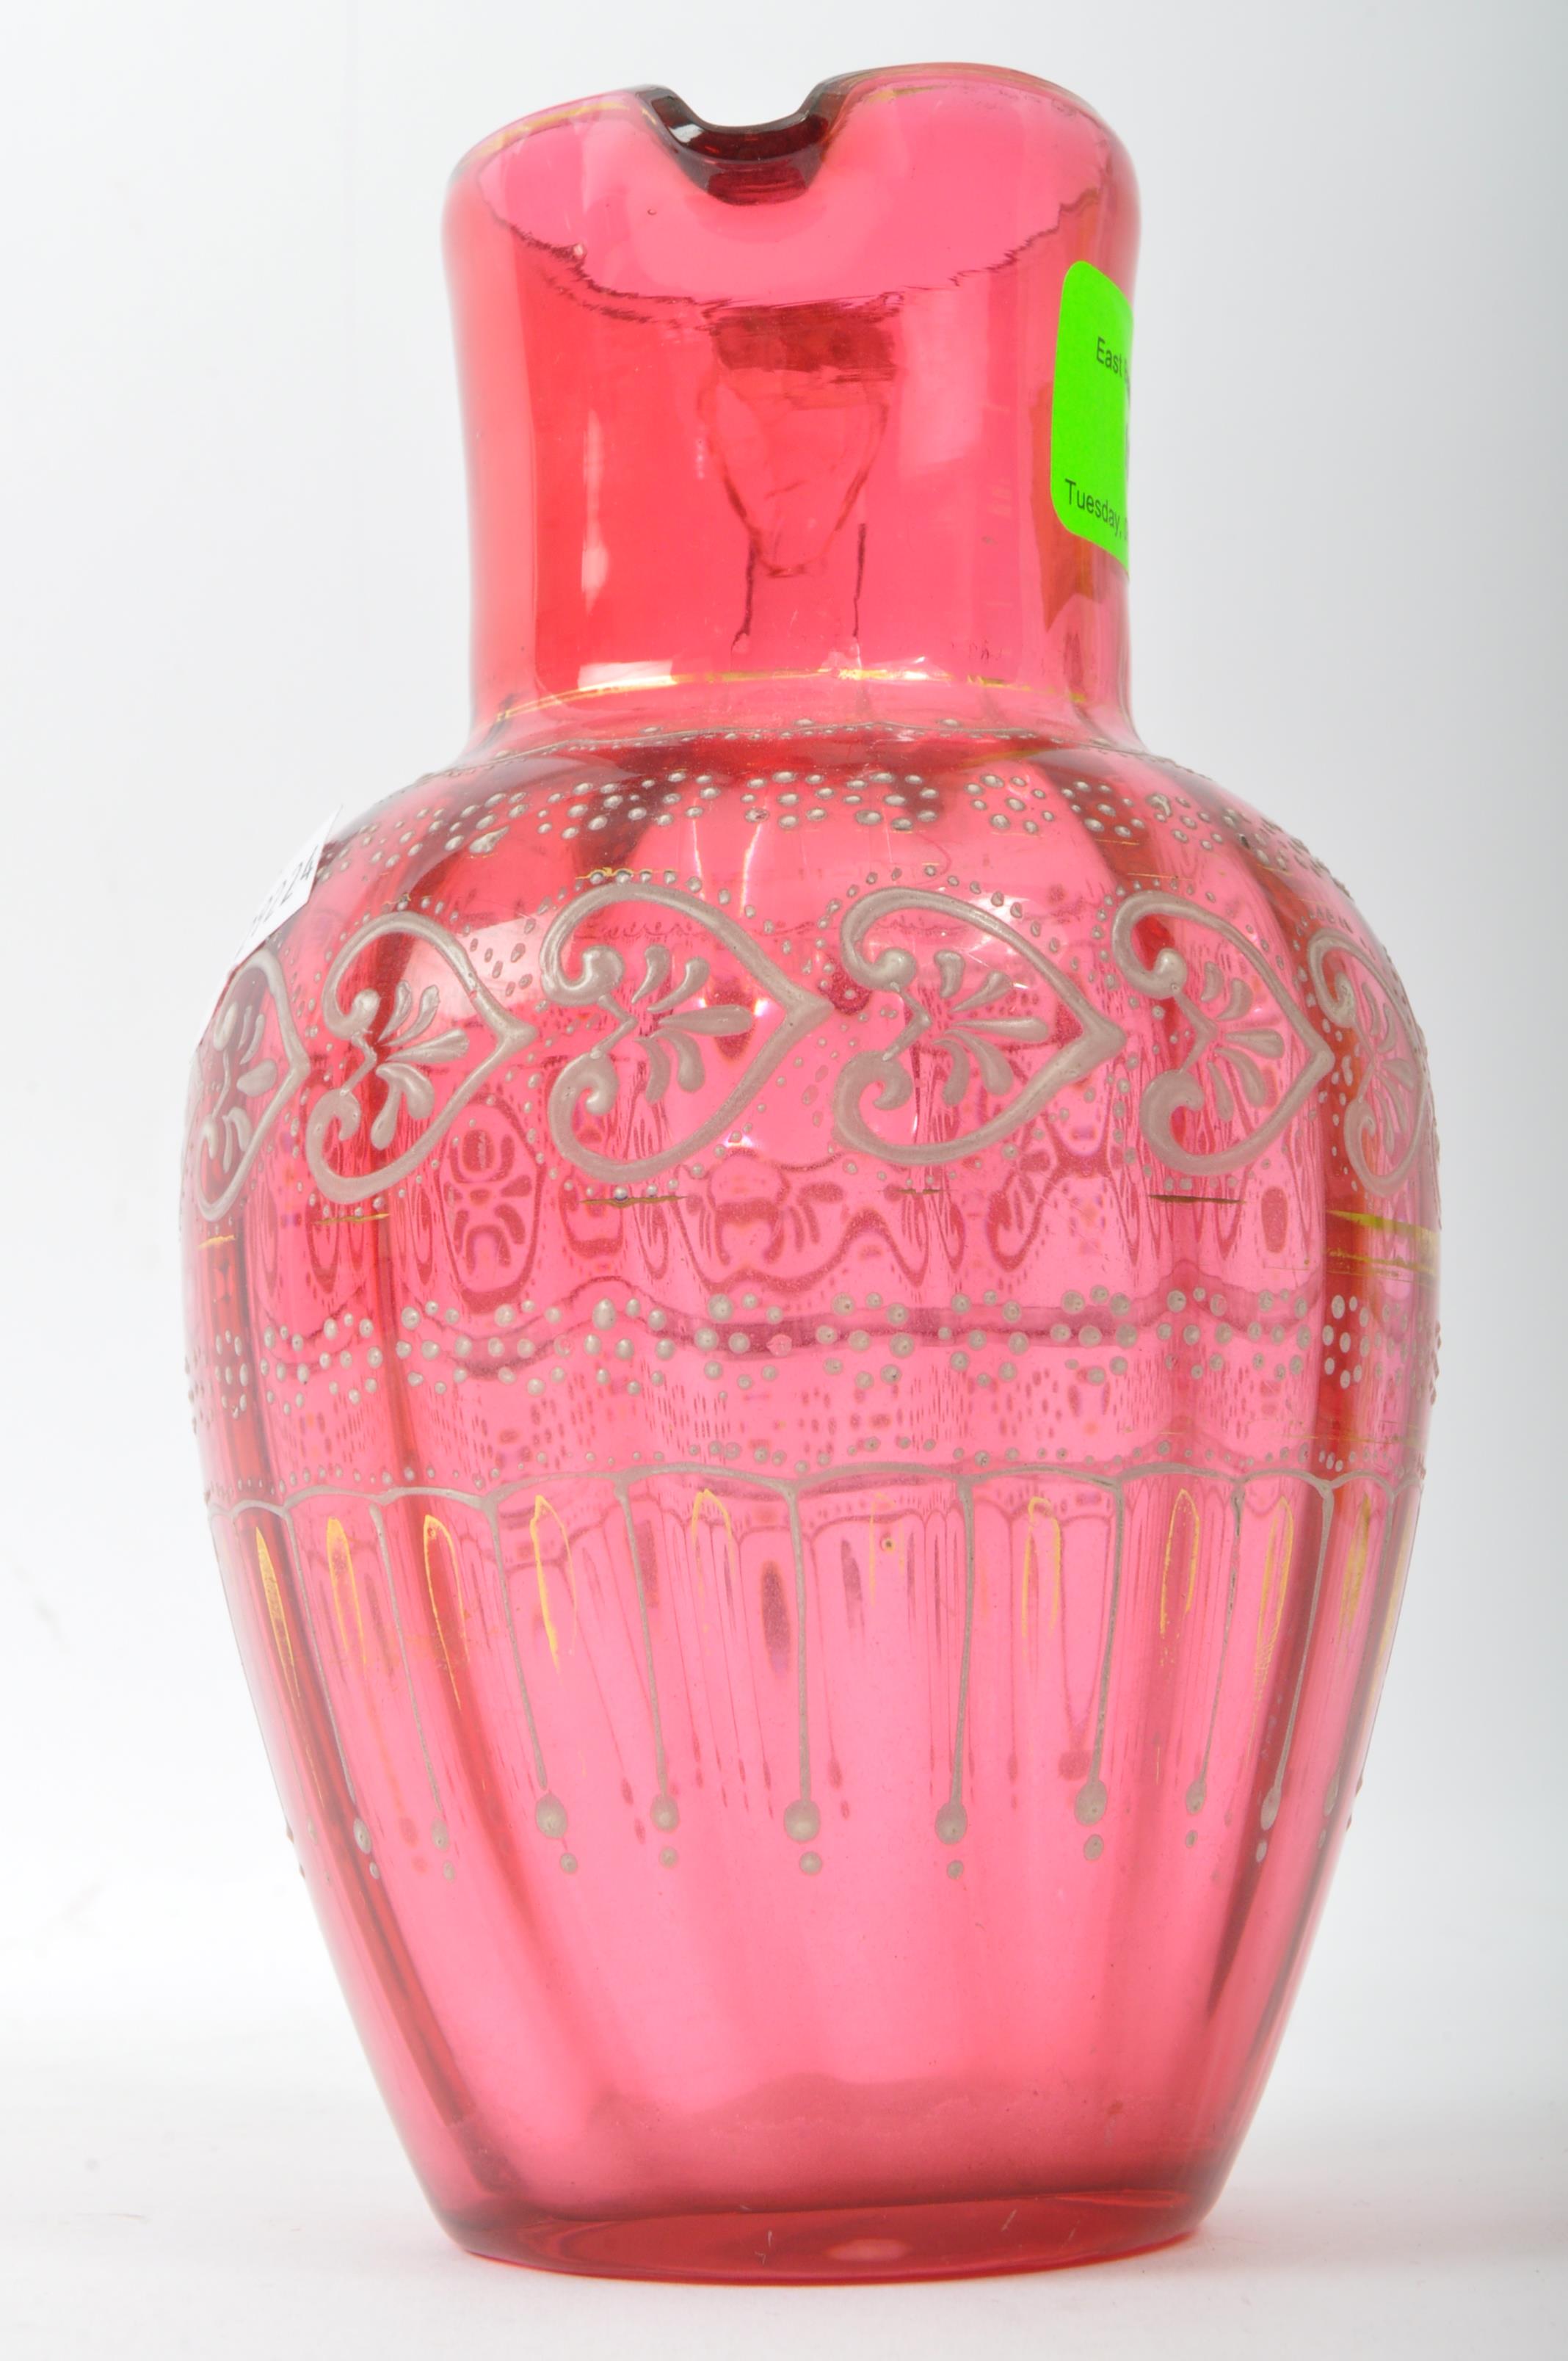 19TH CENTURY BOHEMIAN CRANBERRY GLASS JUG DECANTER - Image 6 of 6